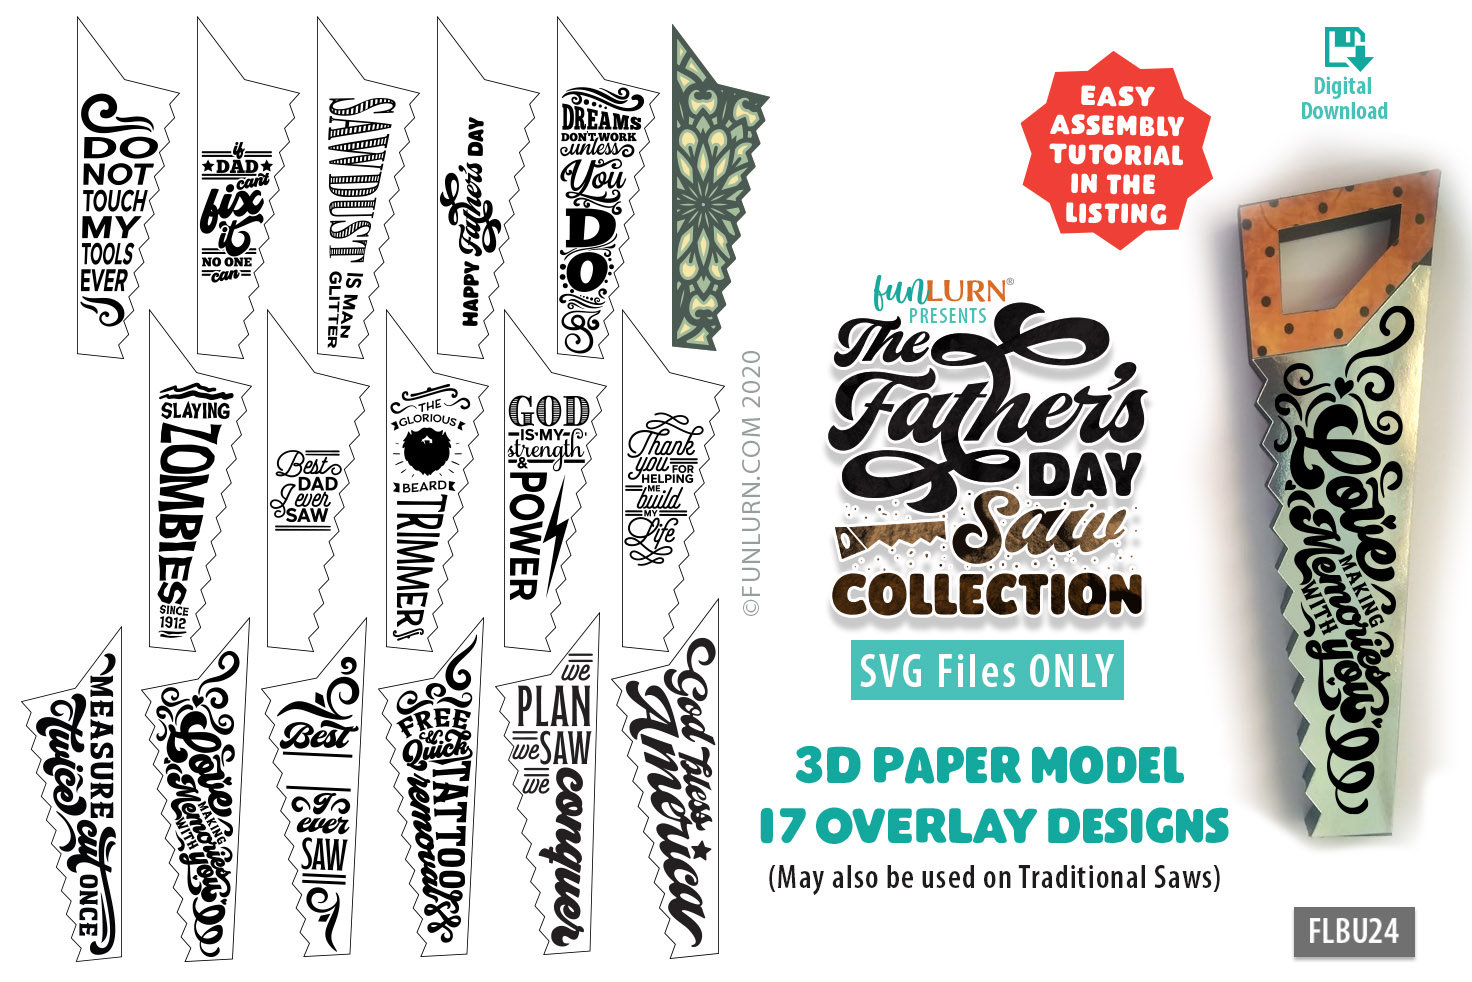 Download 3d Paper Saw With 17 Overlay Designs For Father S Day Funlurn